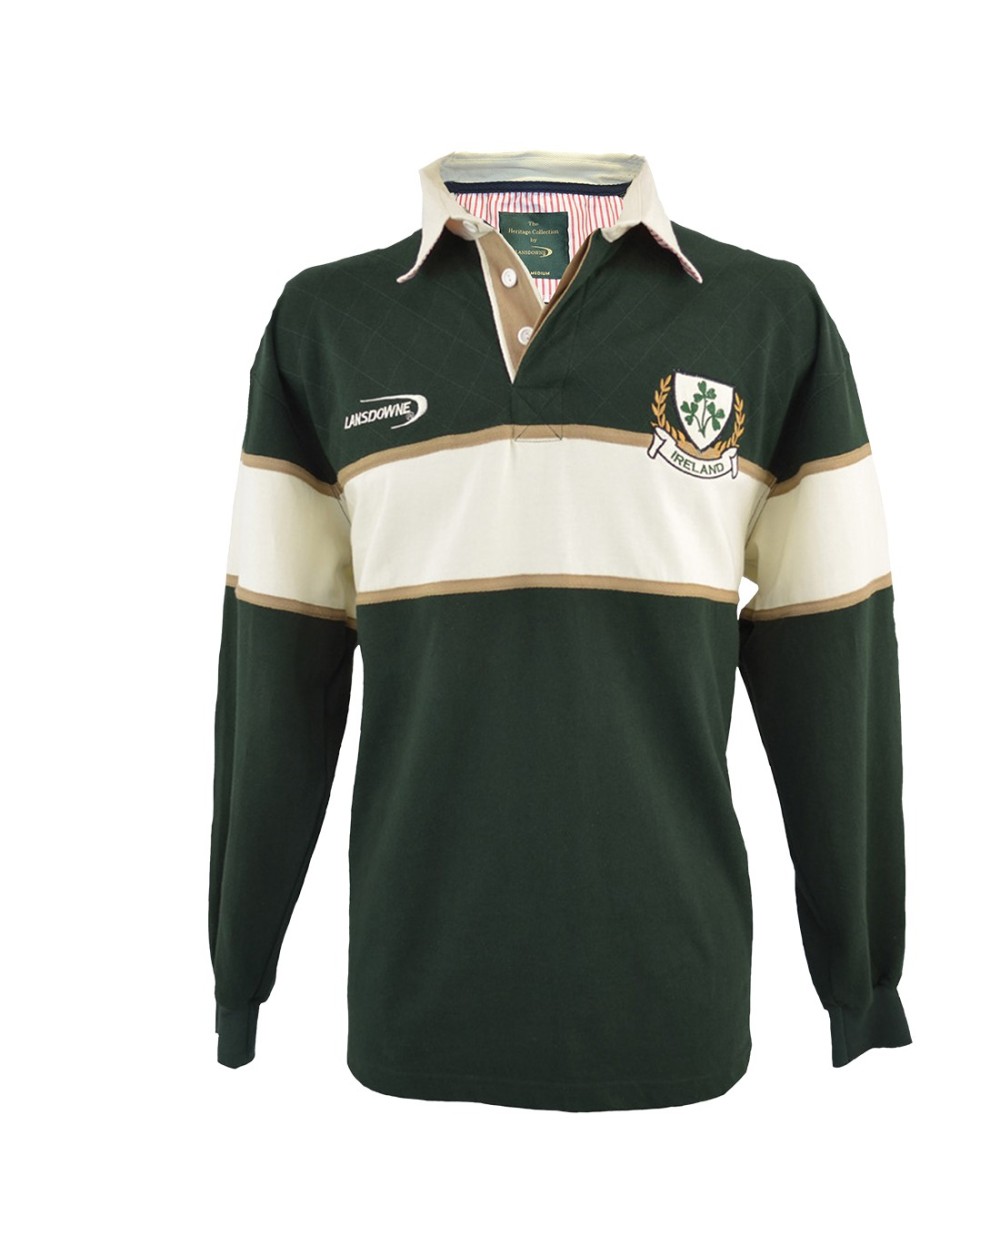 Lansdowne Adults Green Performance Rugby Shirt